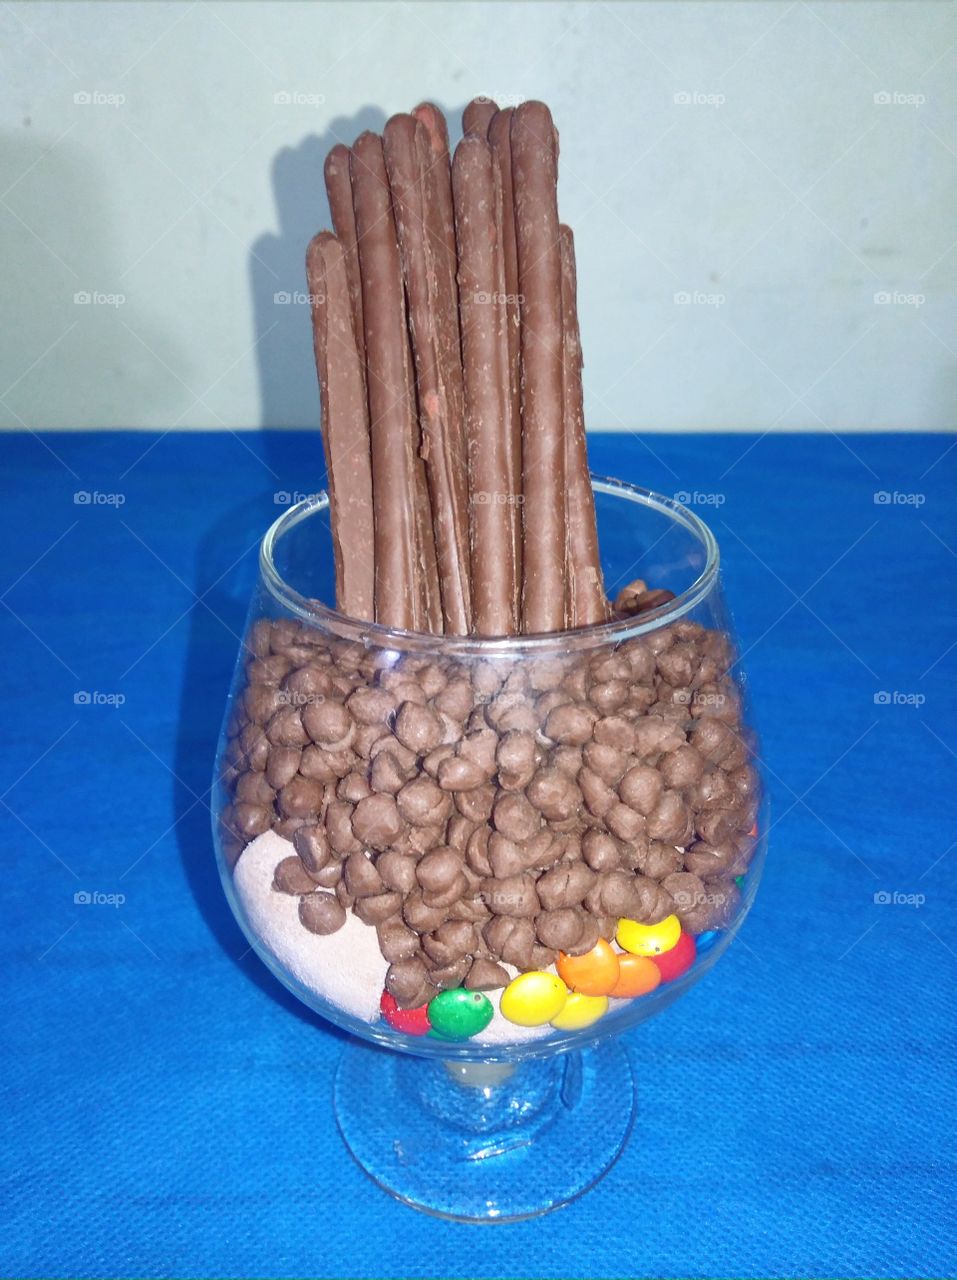 Chocolate pretzels, chocolate tidbits,  chocolate nips in different colors & chocolate marshmallows in the goblet glass.